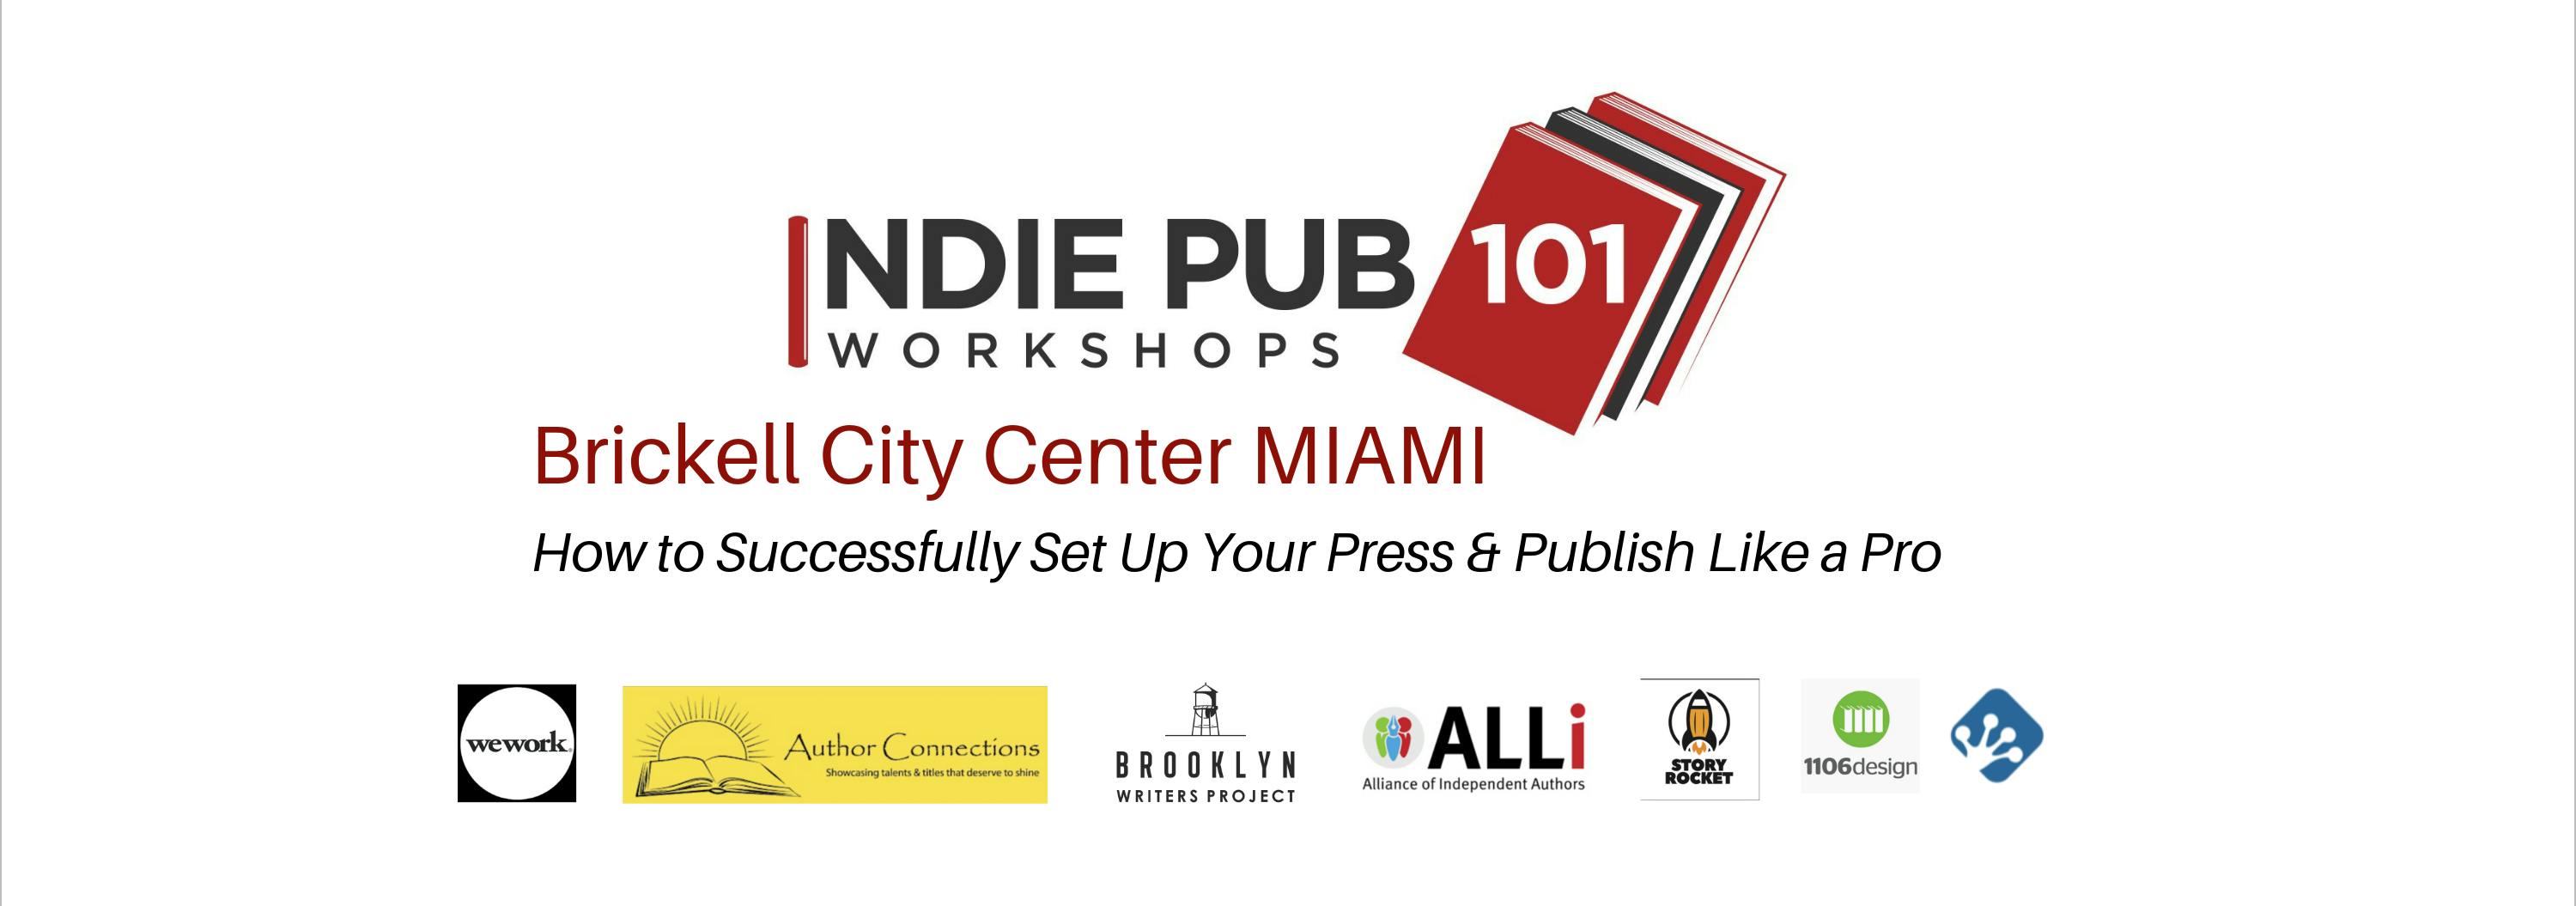 The Indie Publishing Workshop MIAMI